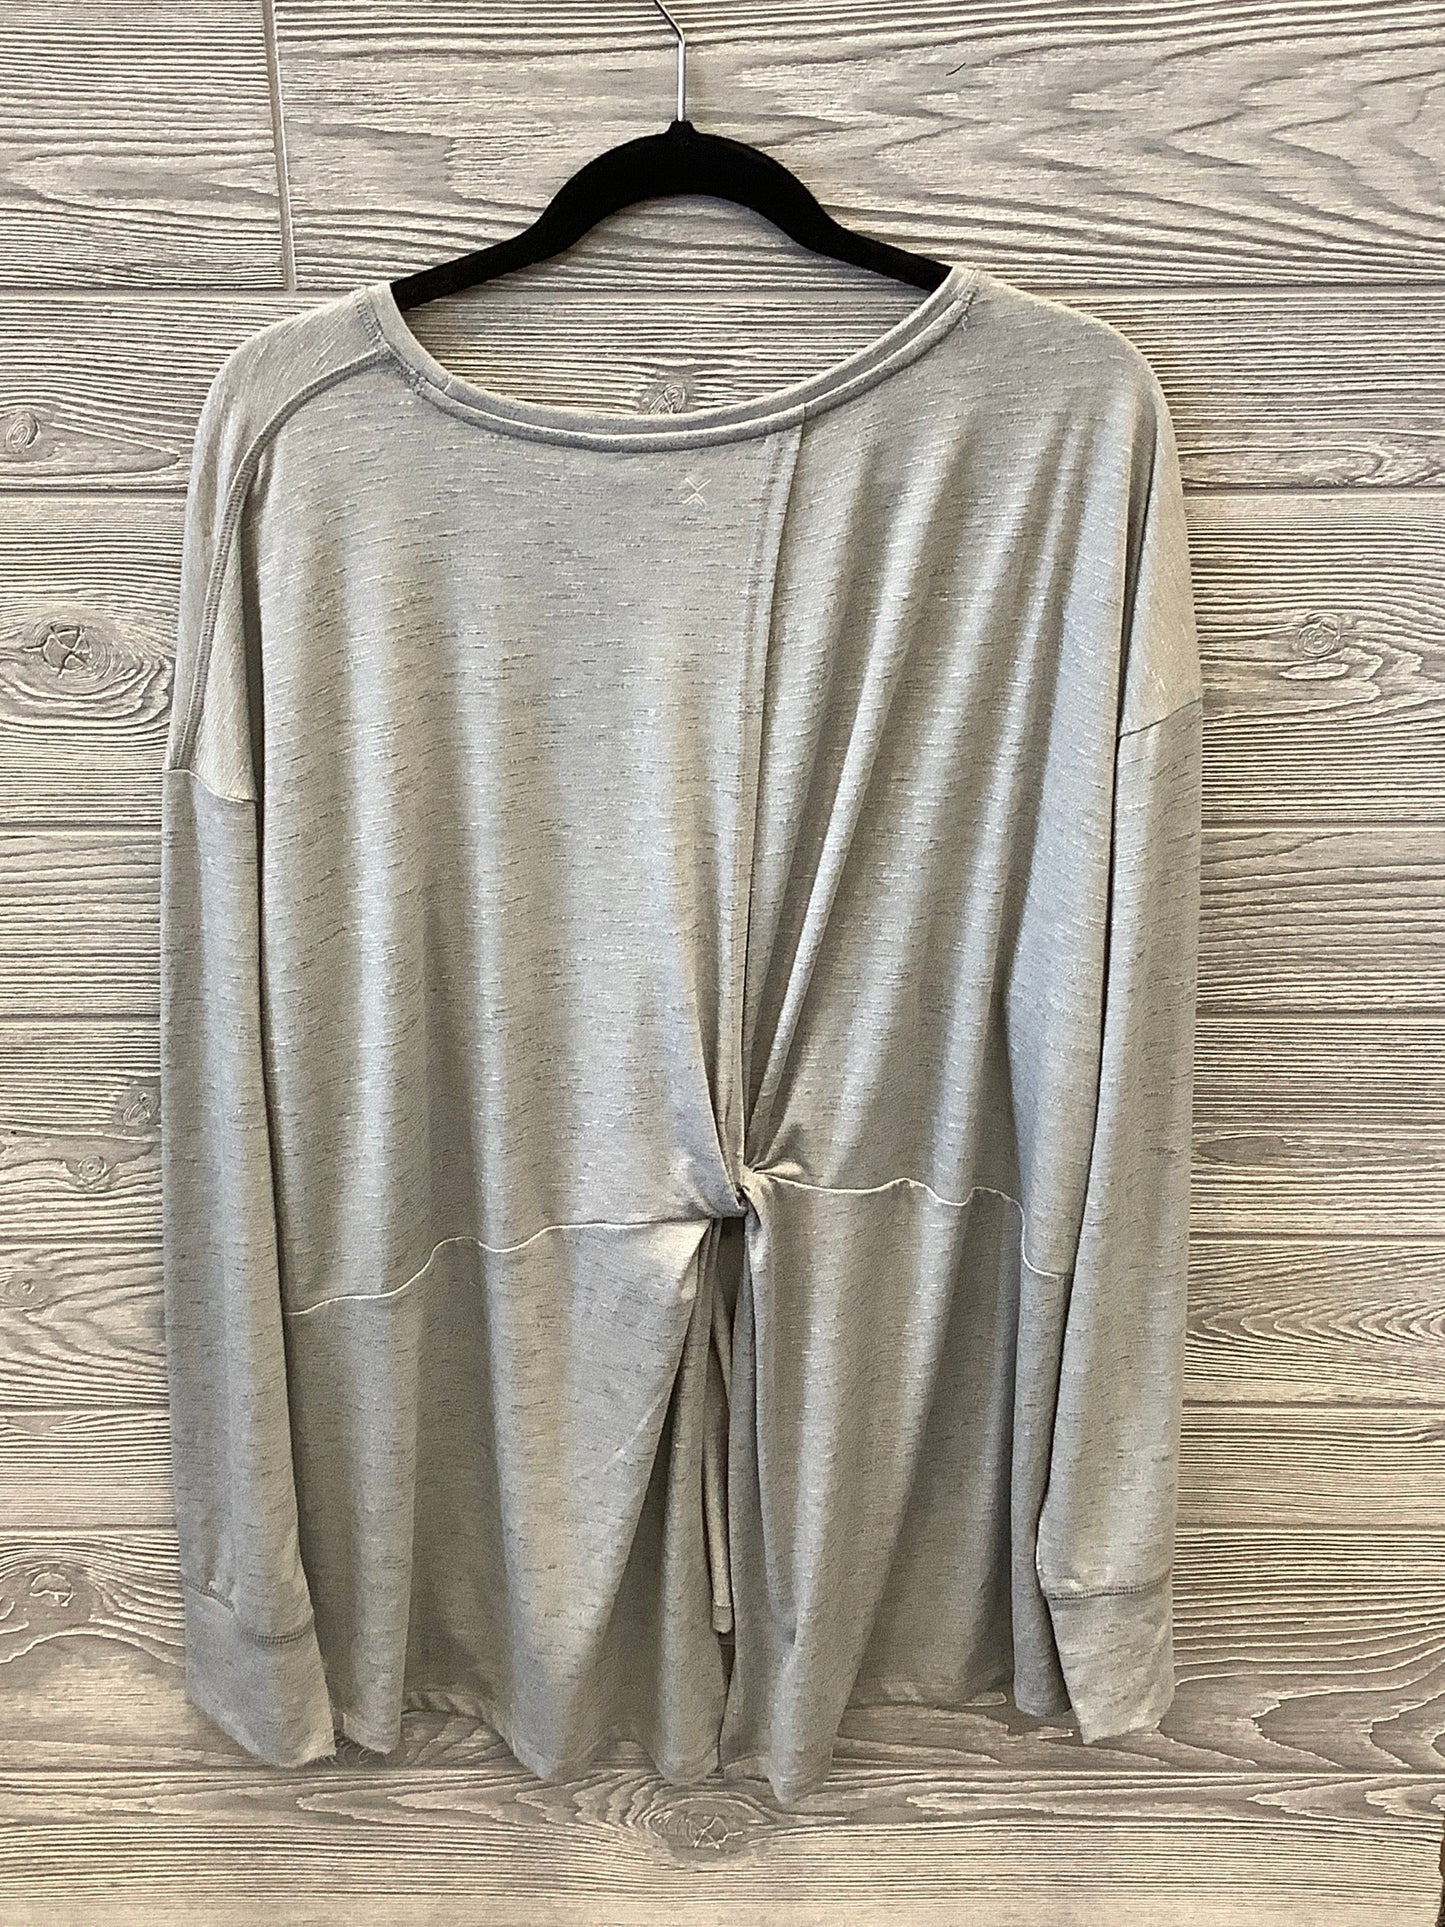 Athletic Top Long Sleeve Crewneck By Xersion  Size: 2x